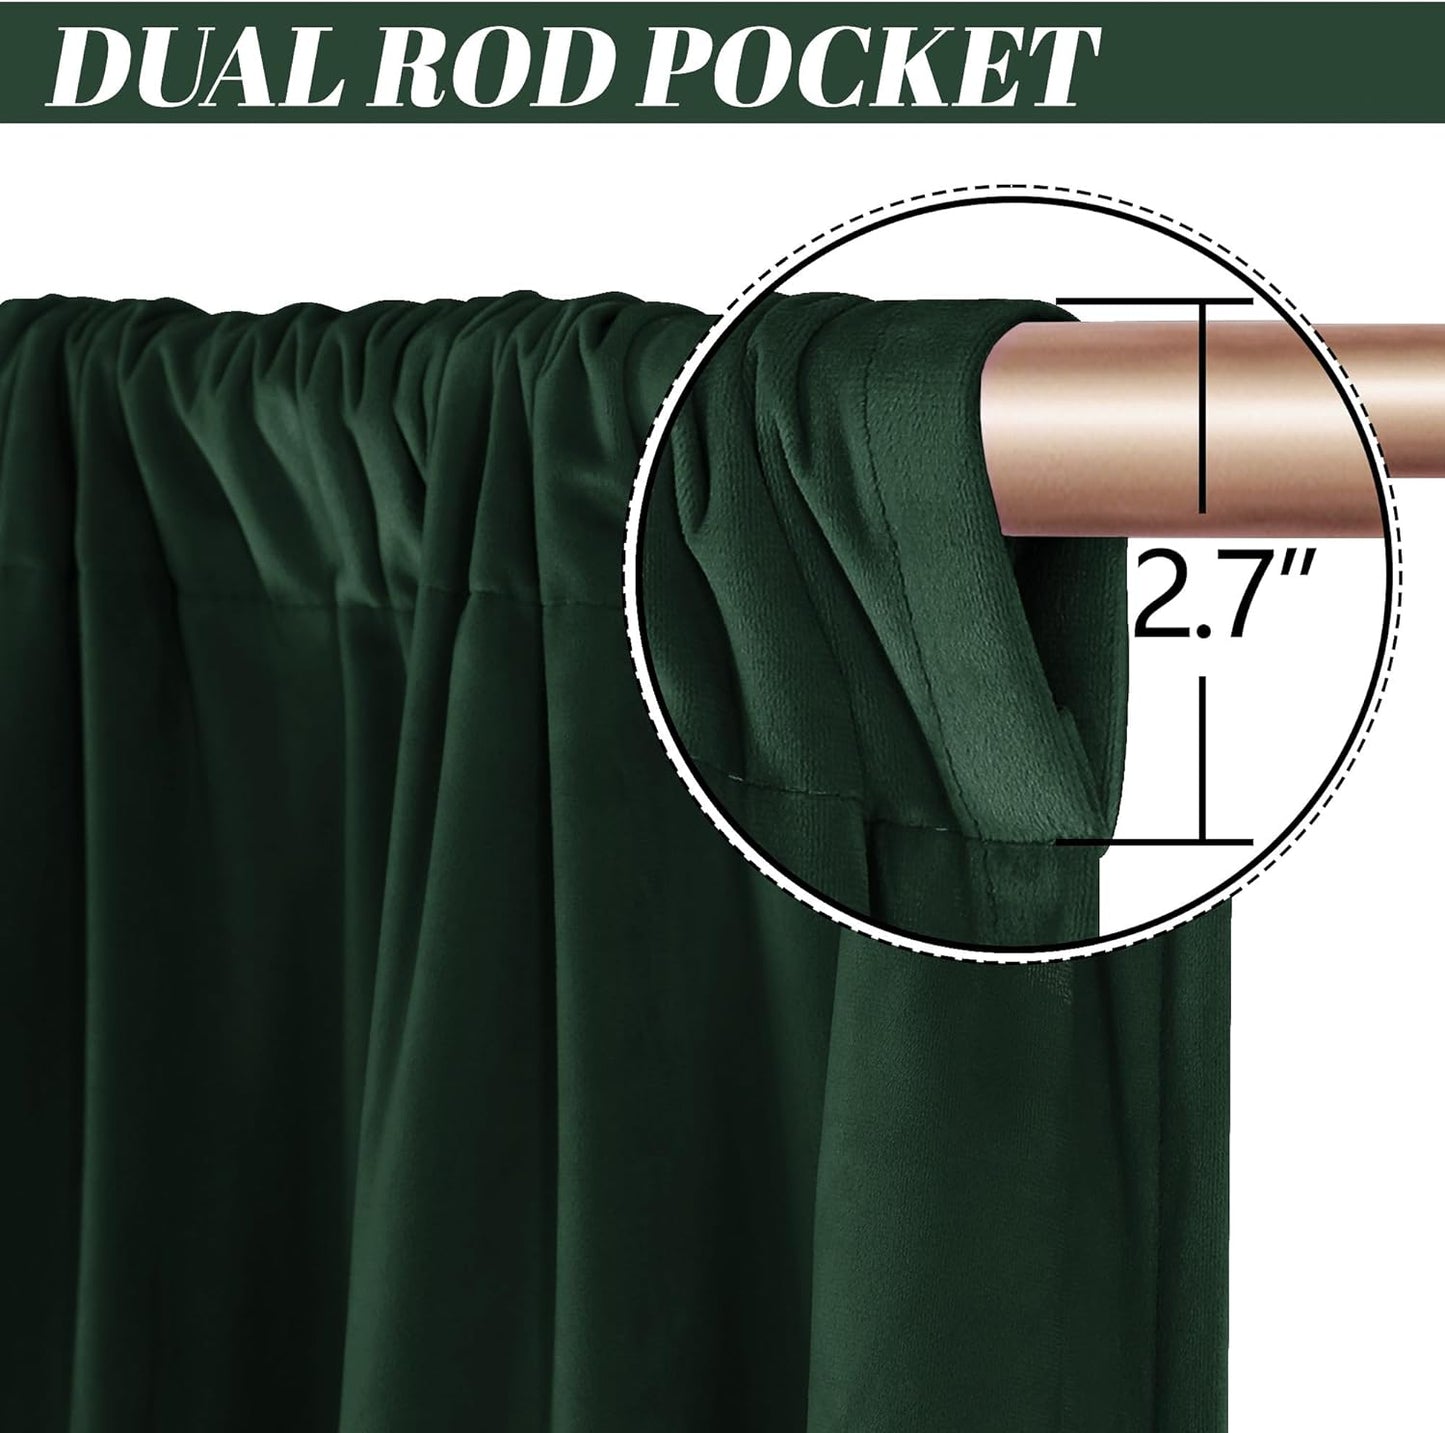 Nanbowang Green Velvet Curtains 63 Inches Long Dark Green Light Blocking Rod Pocket Window Curtain Panels Set of 2 Heat Insulated Curtains Thermal Curtain Panels for Bedroom  nanbowang   